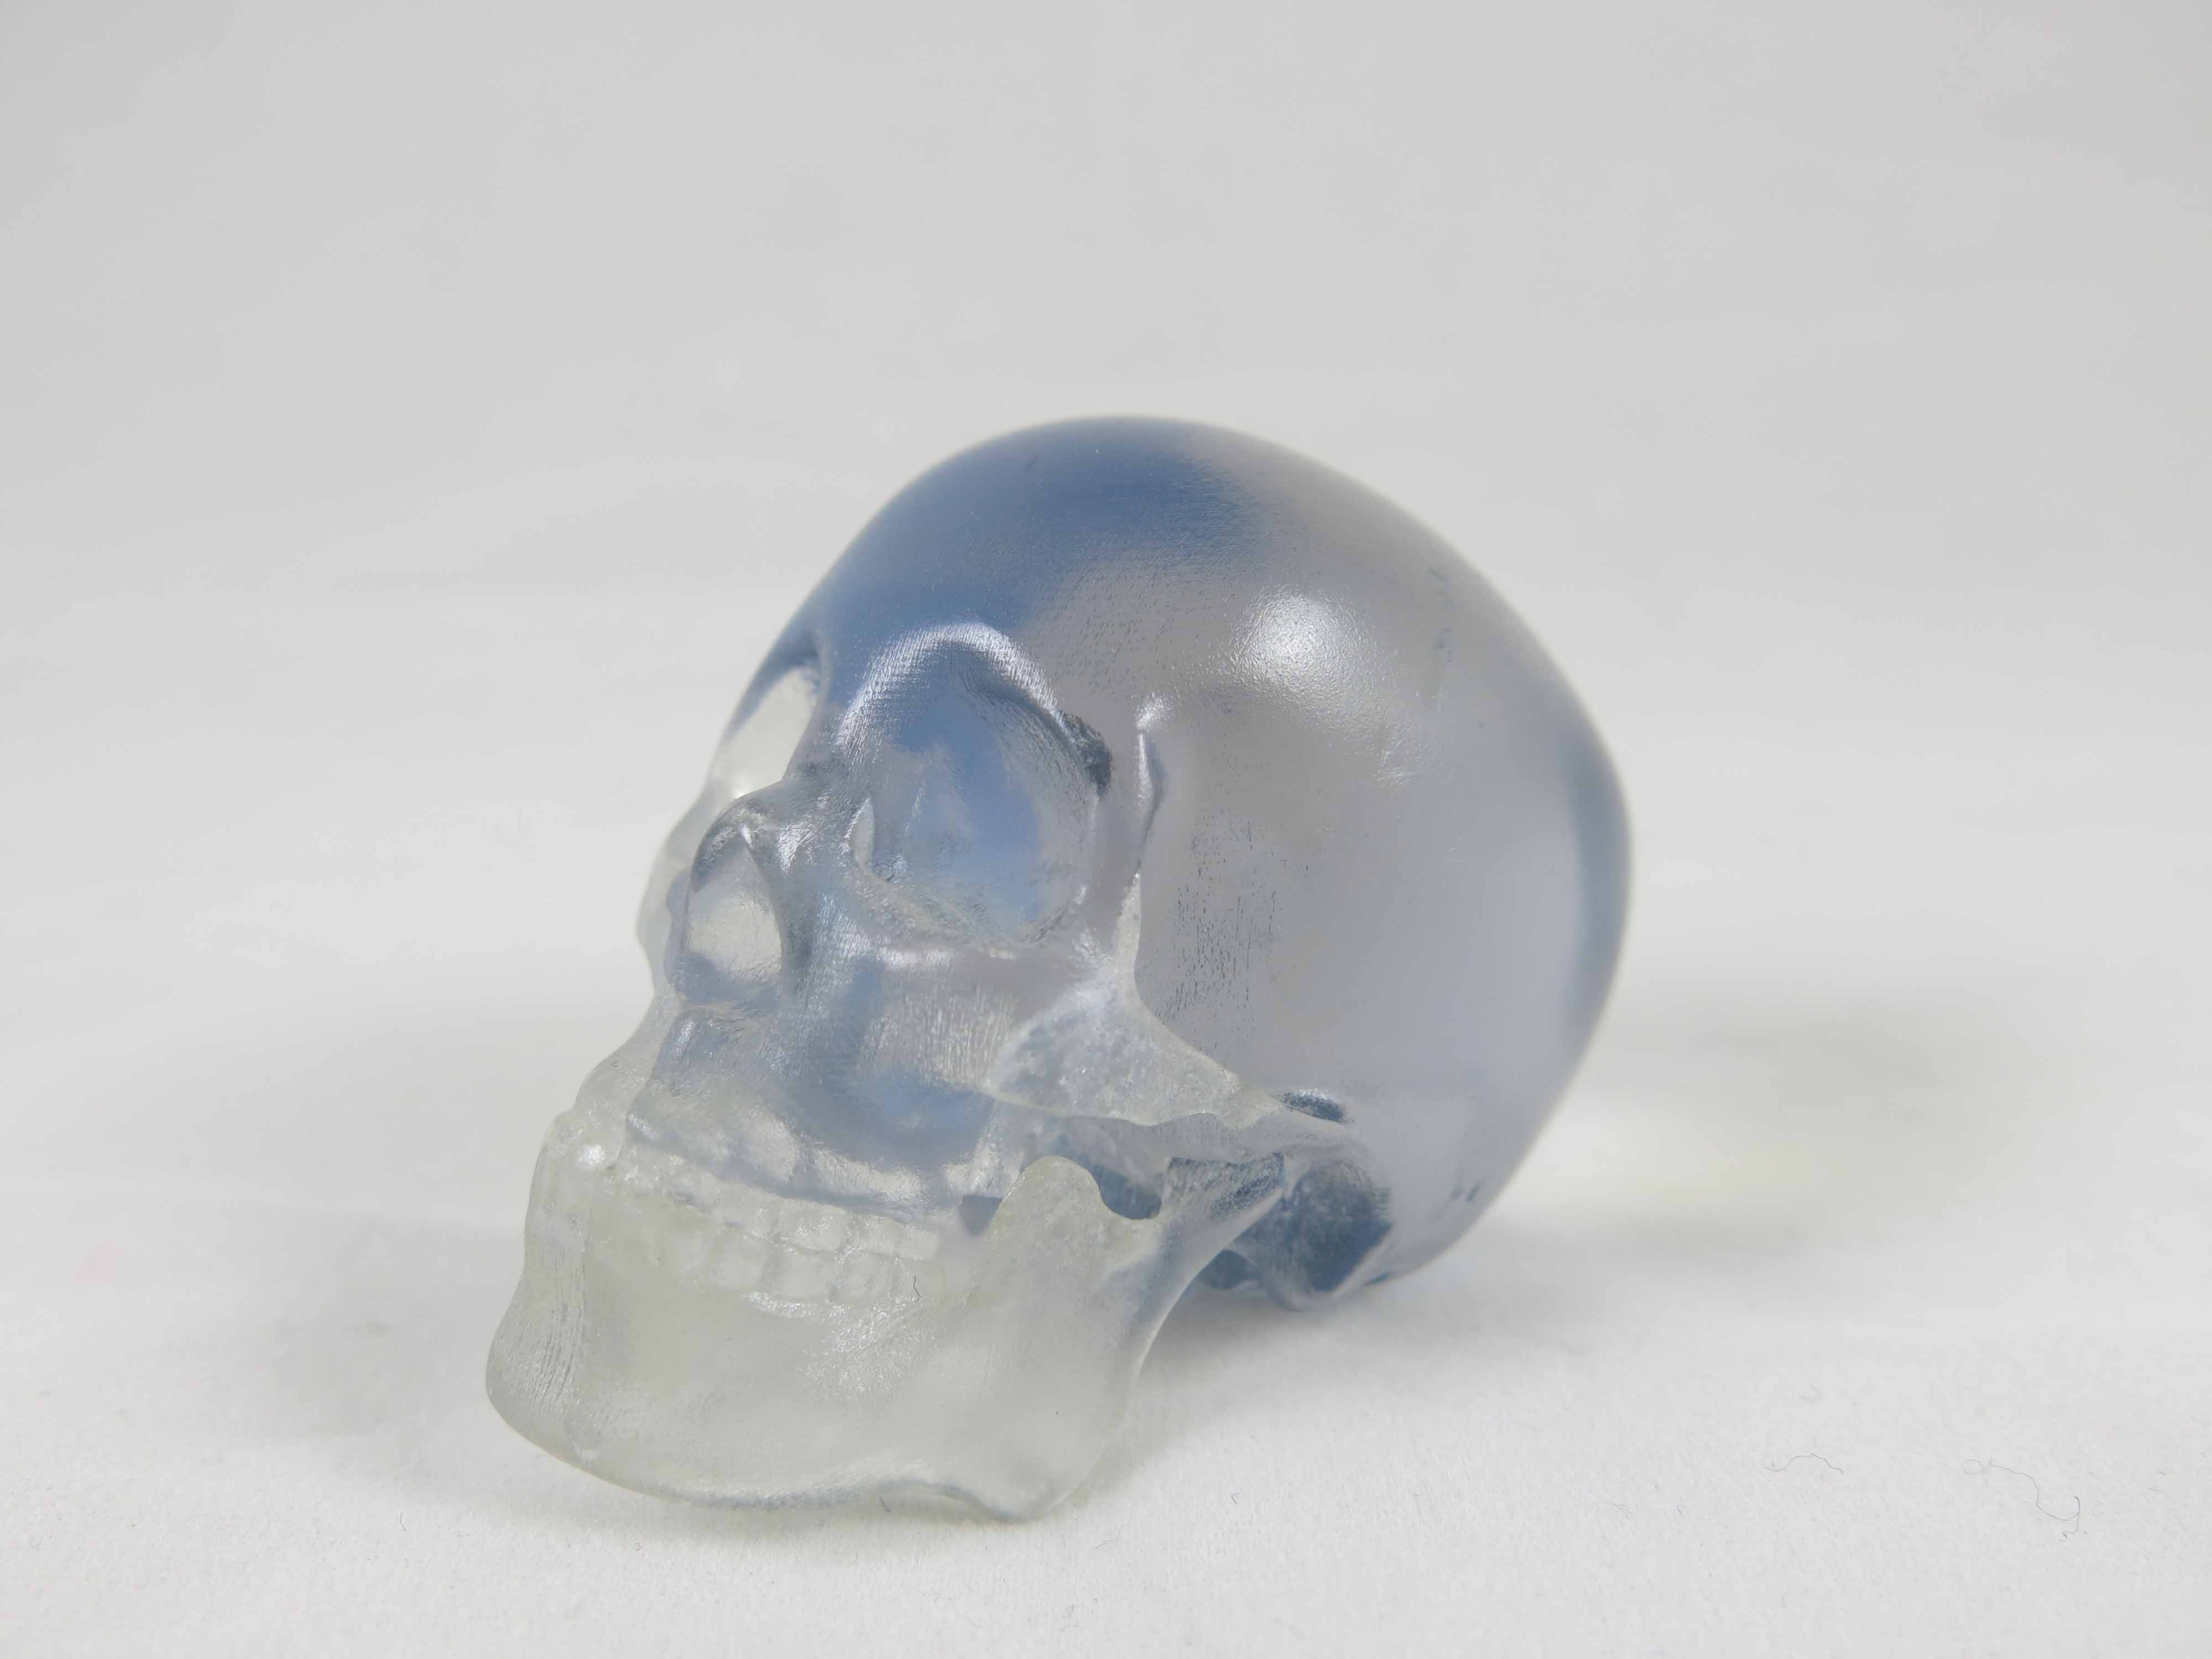 How to Polish Your Translucent Resin 3D Prints?